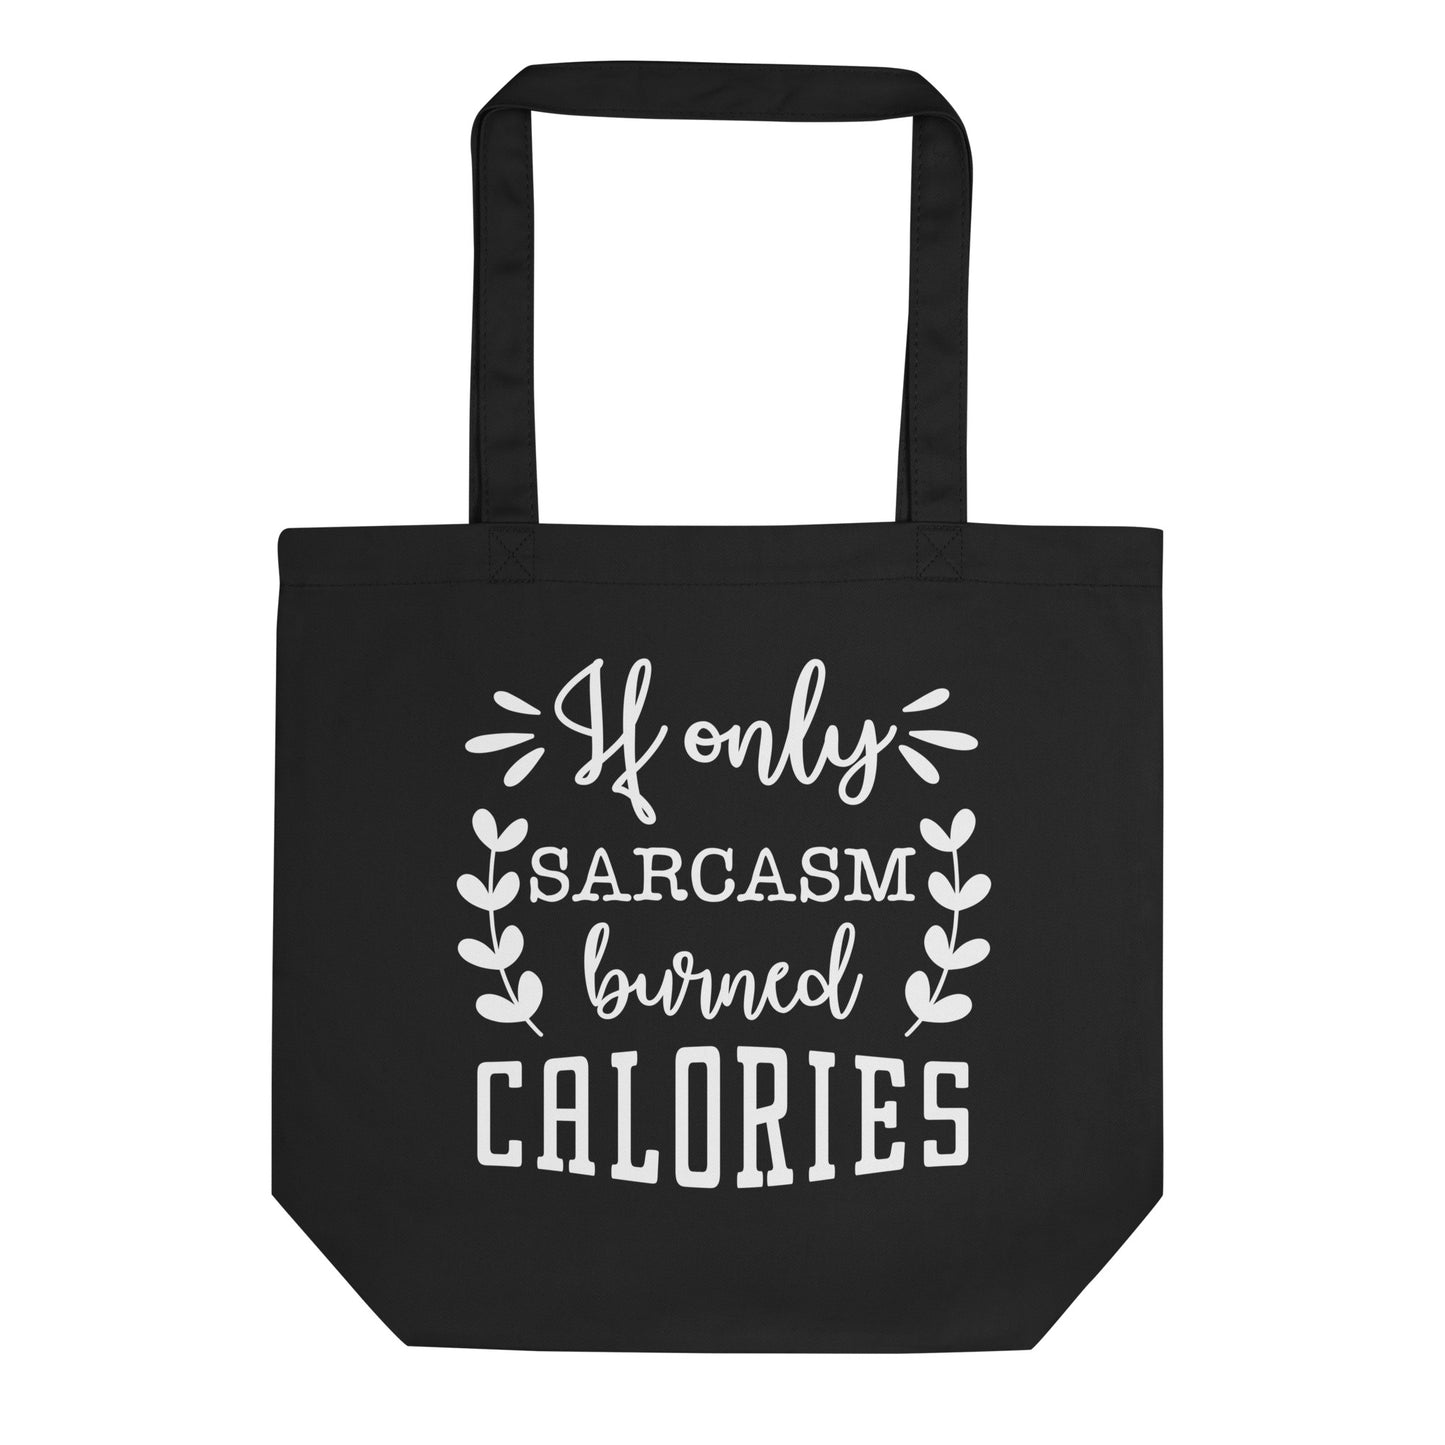 If Only Sarcasm Burned Calories Eco Tote Bag